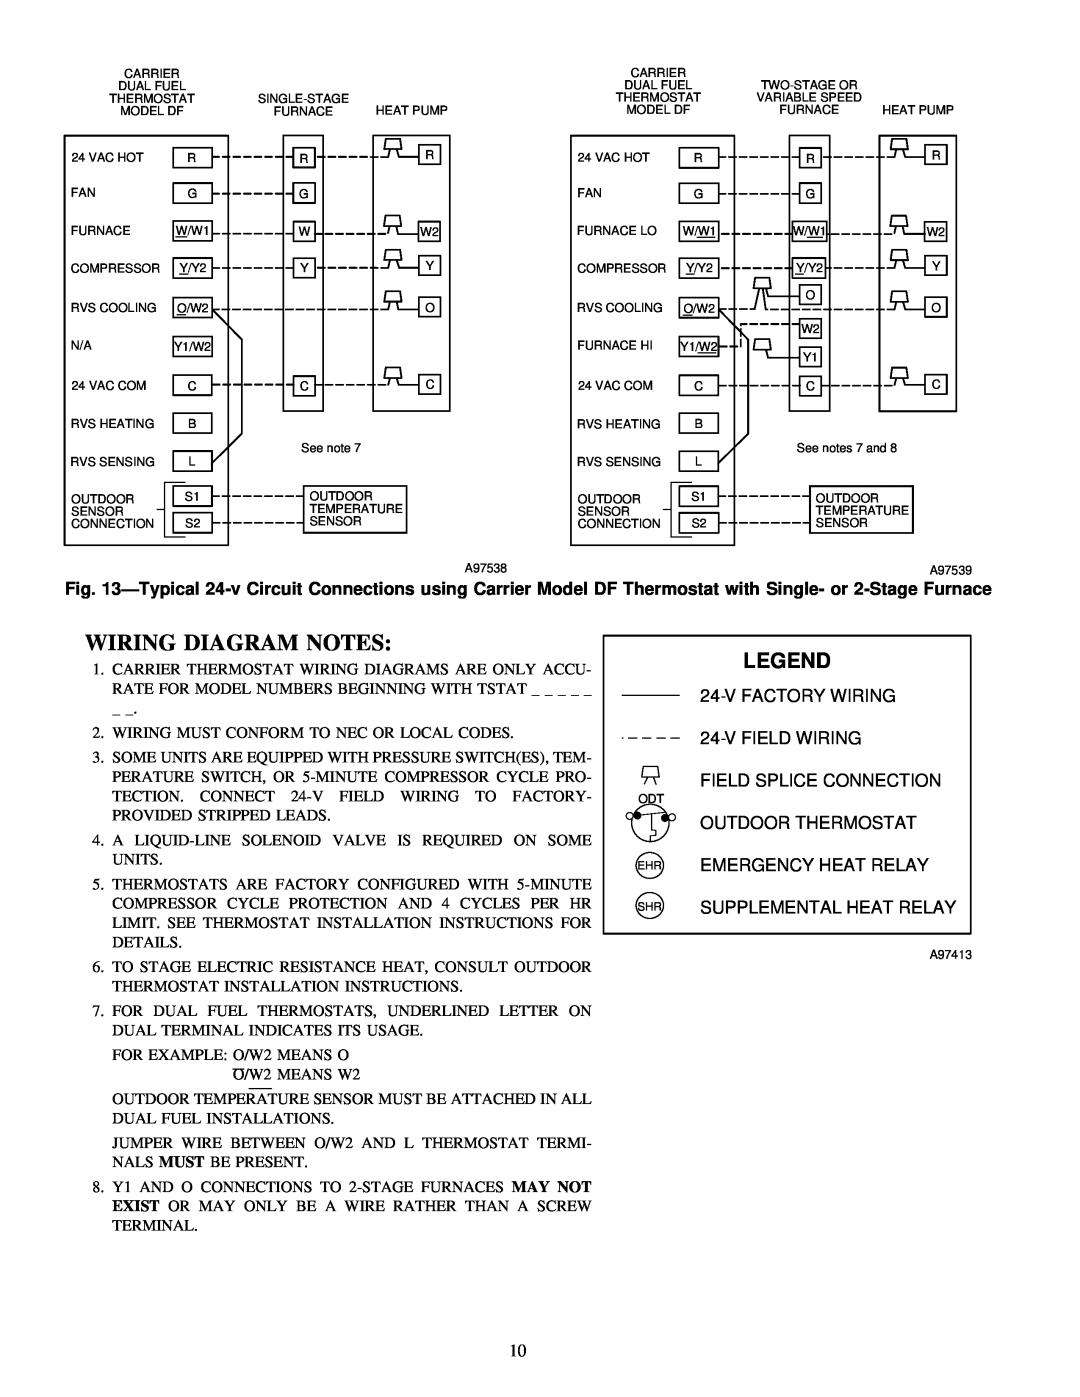 Carrier 38YSA Wiring Diagram Notes, VFACTORY WIRING 24-VFIELD WIRING, Field Splice Connection, Outdoor Thermostat 